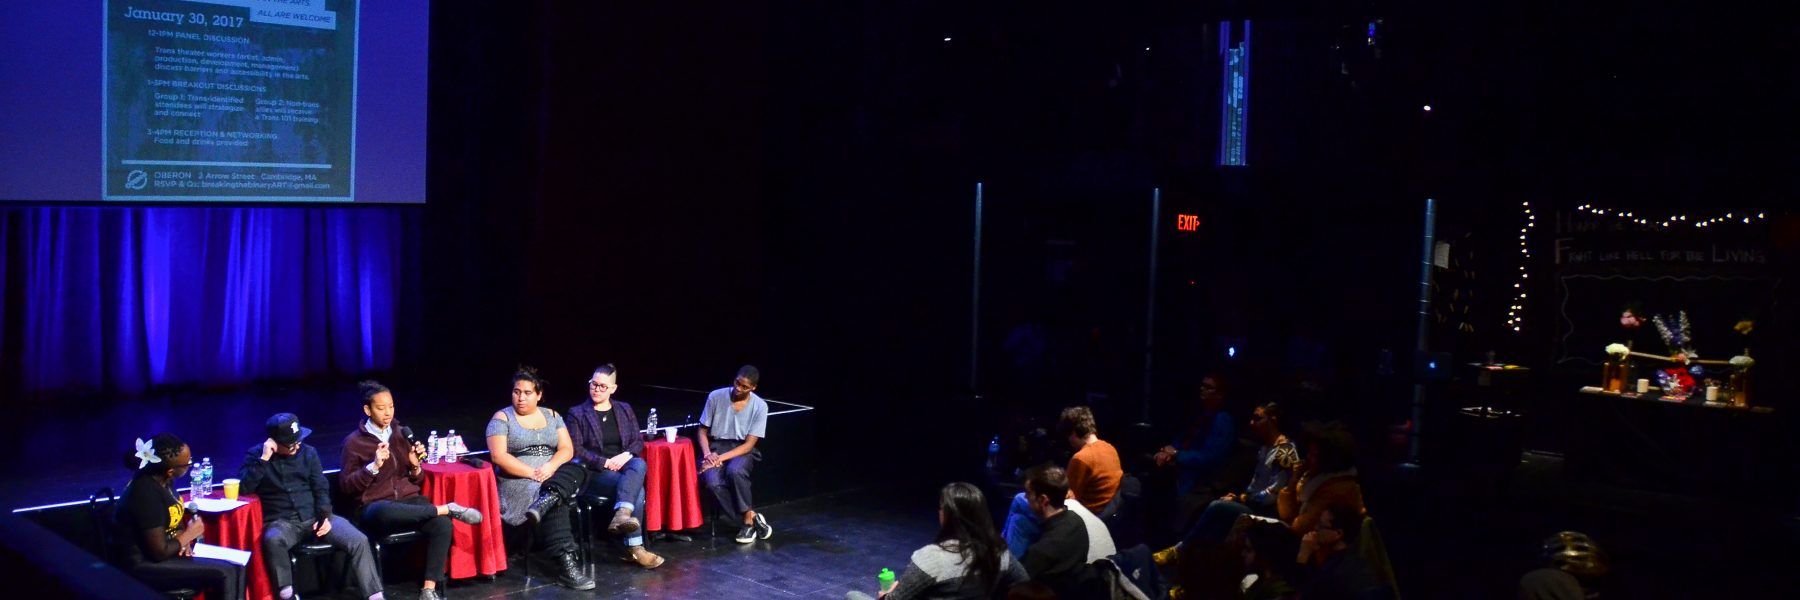 A panel of 6 speakers sits in front of a lit stage. An audience watches them attentively in the darkness.